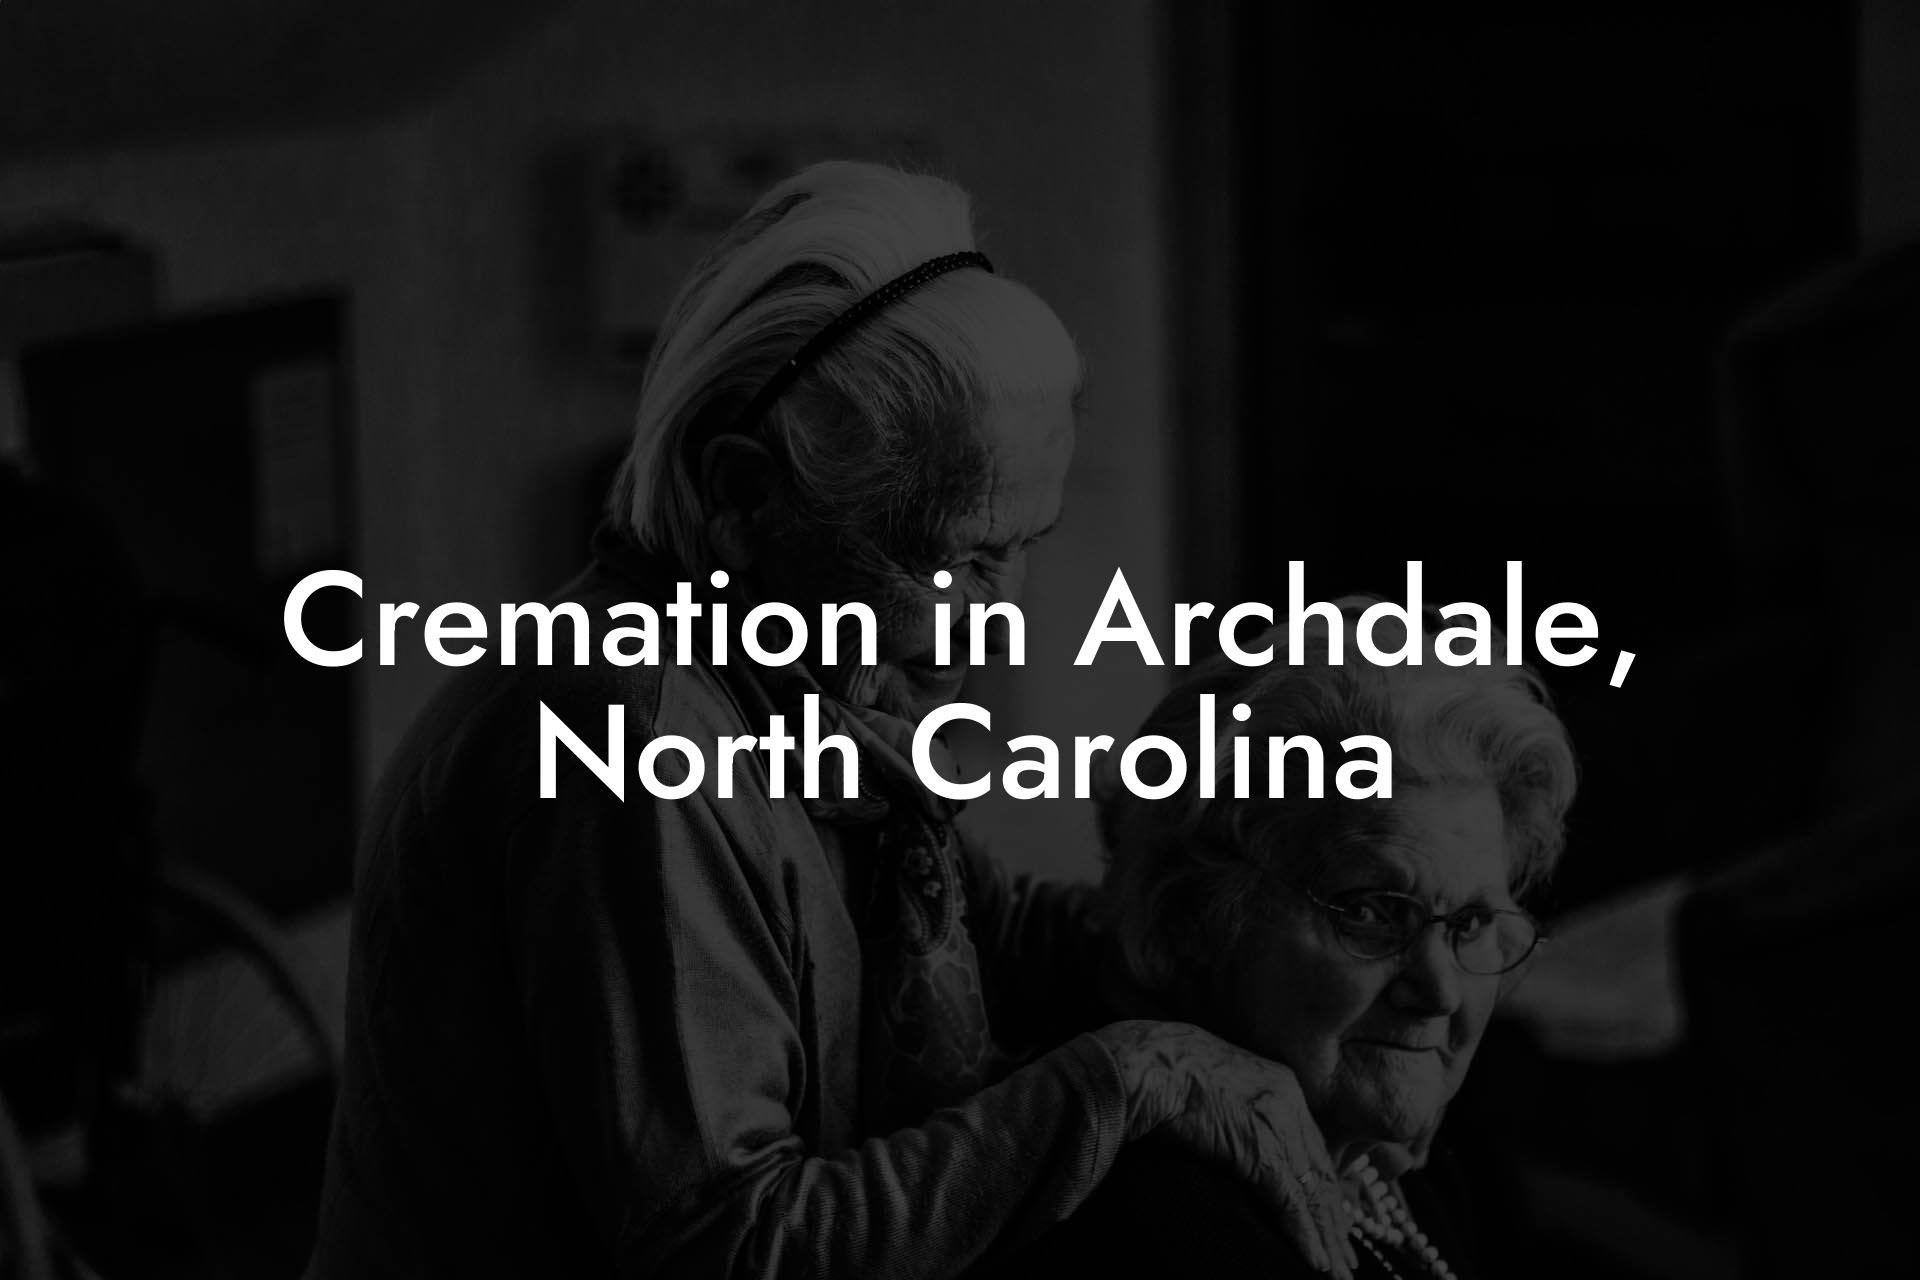 Cremation in Archdale, North Carolina